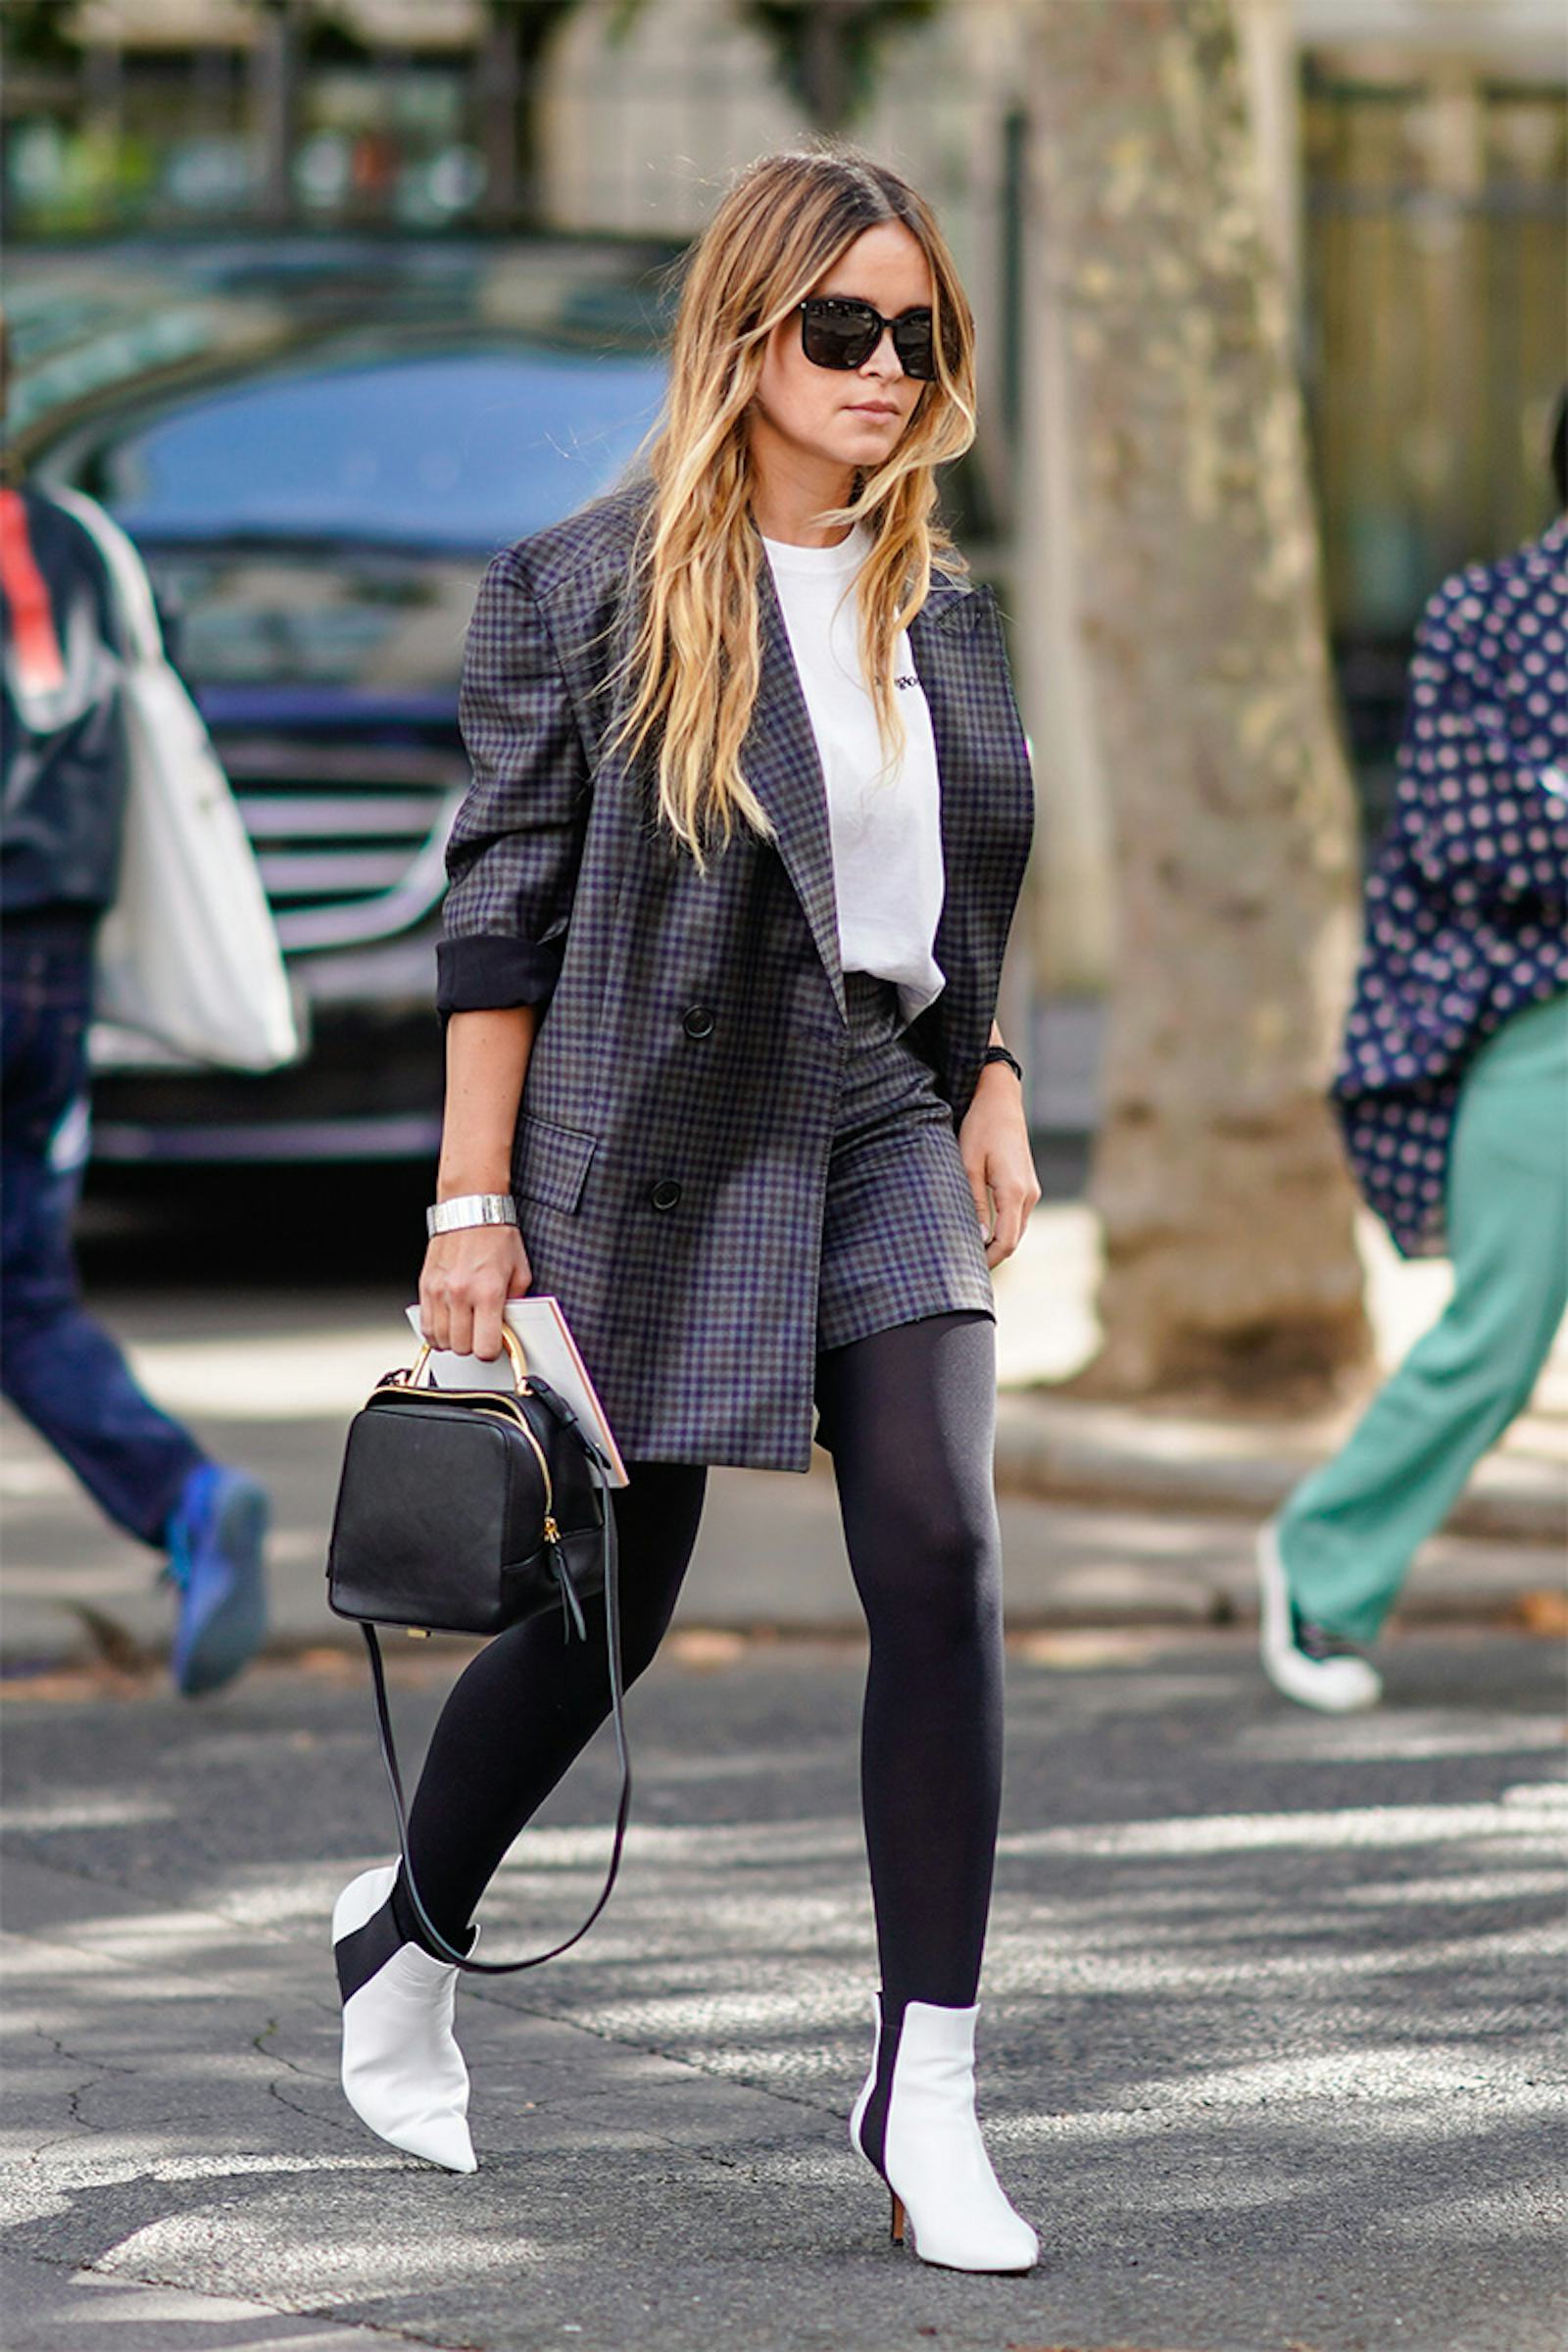 10 Ways To Wear Leggings To Work When Pants Are Too Much To Deal